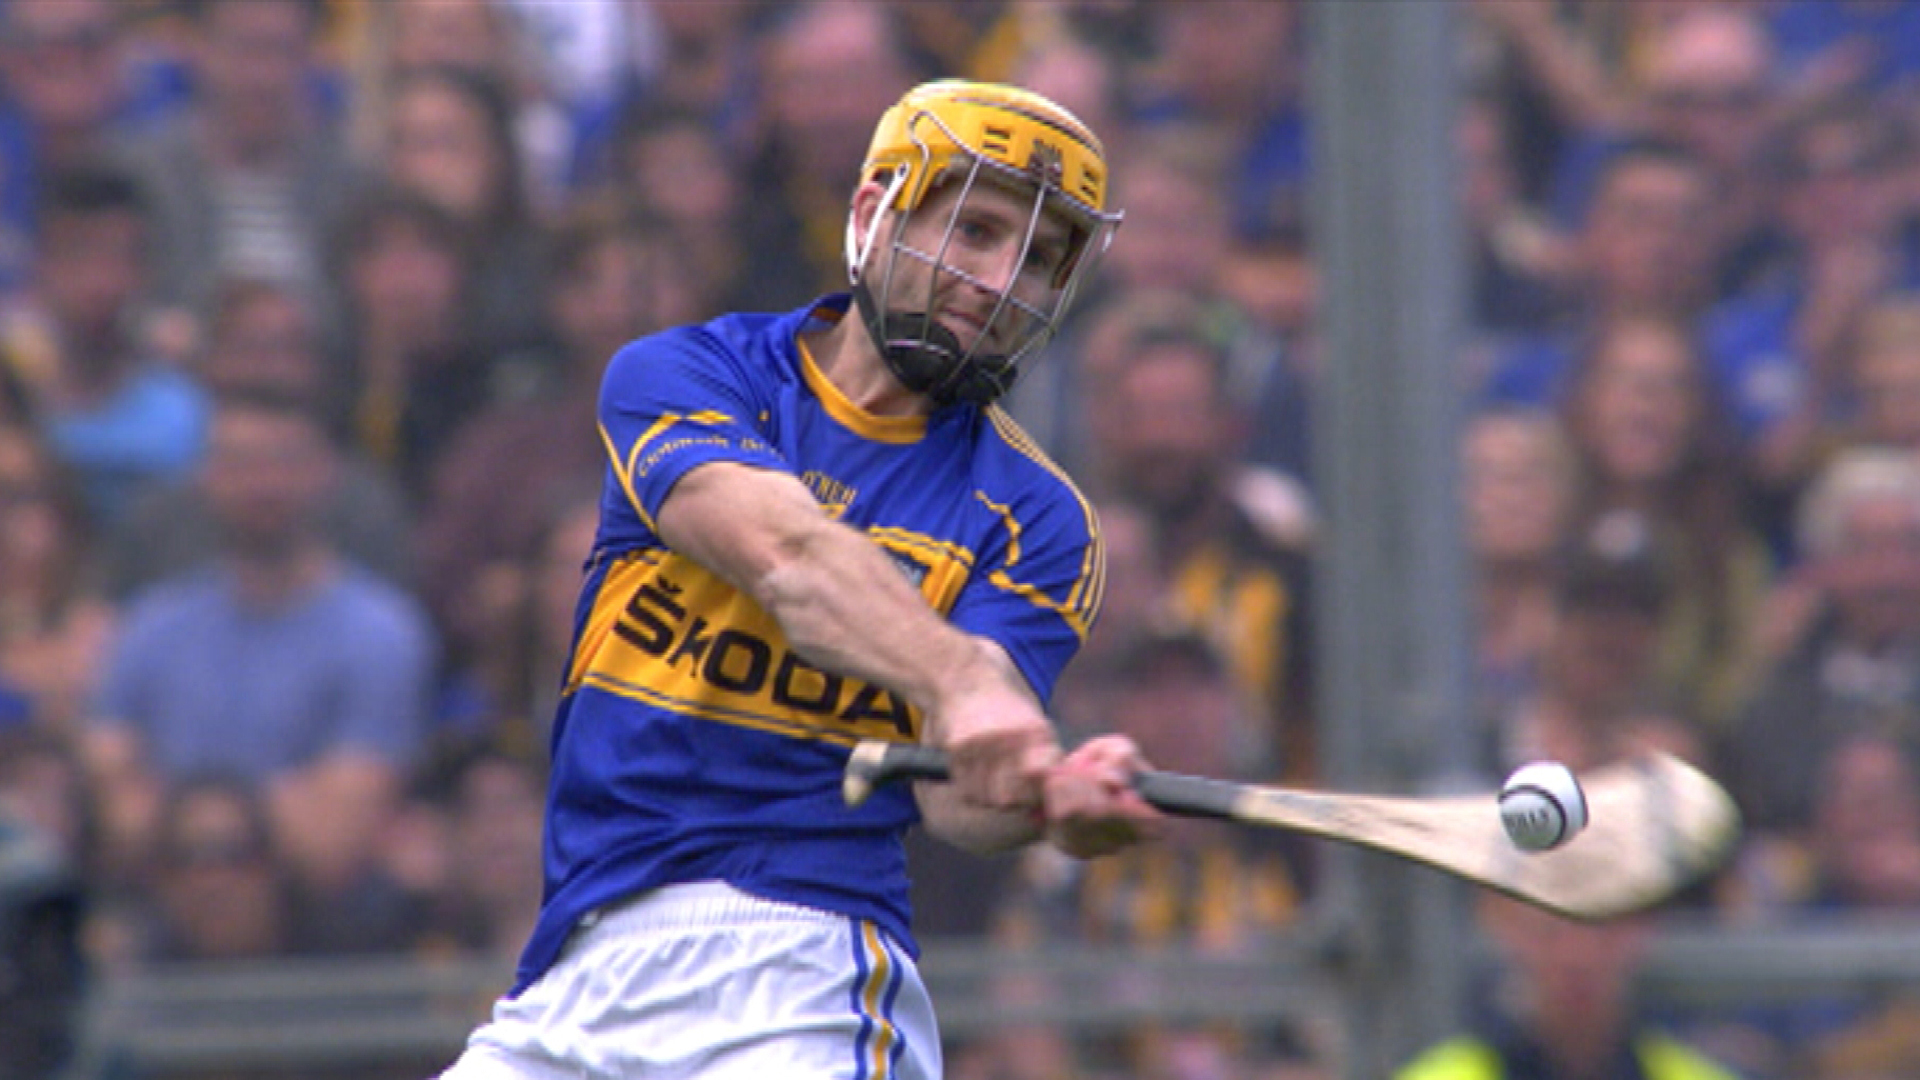 Watch 60 Minutes Overtime: Hurling: Ireland's national obsession - Full show on CBS